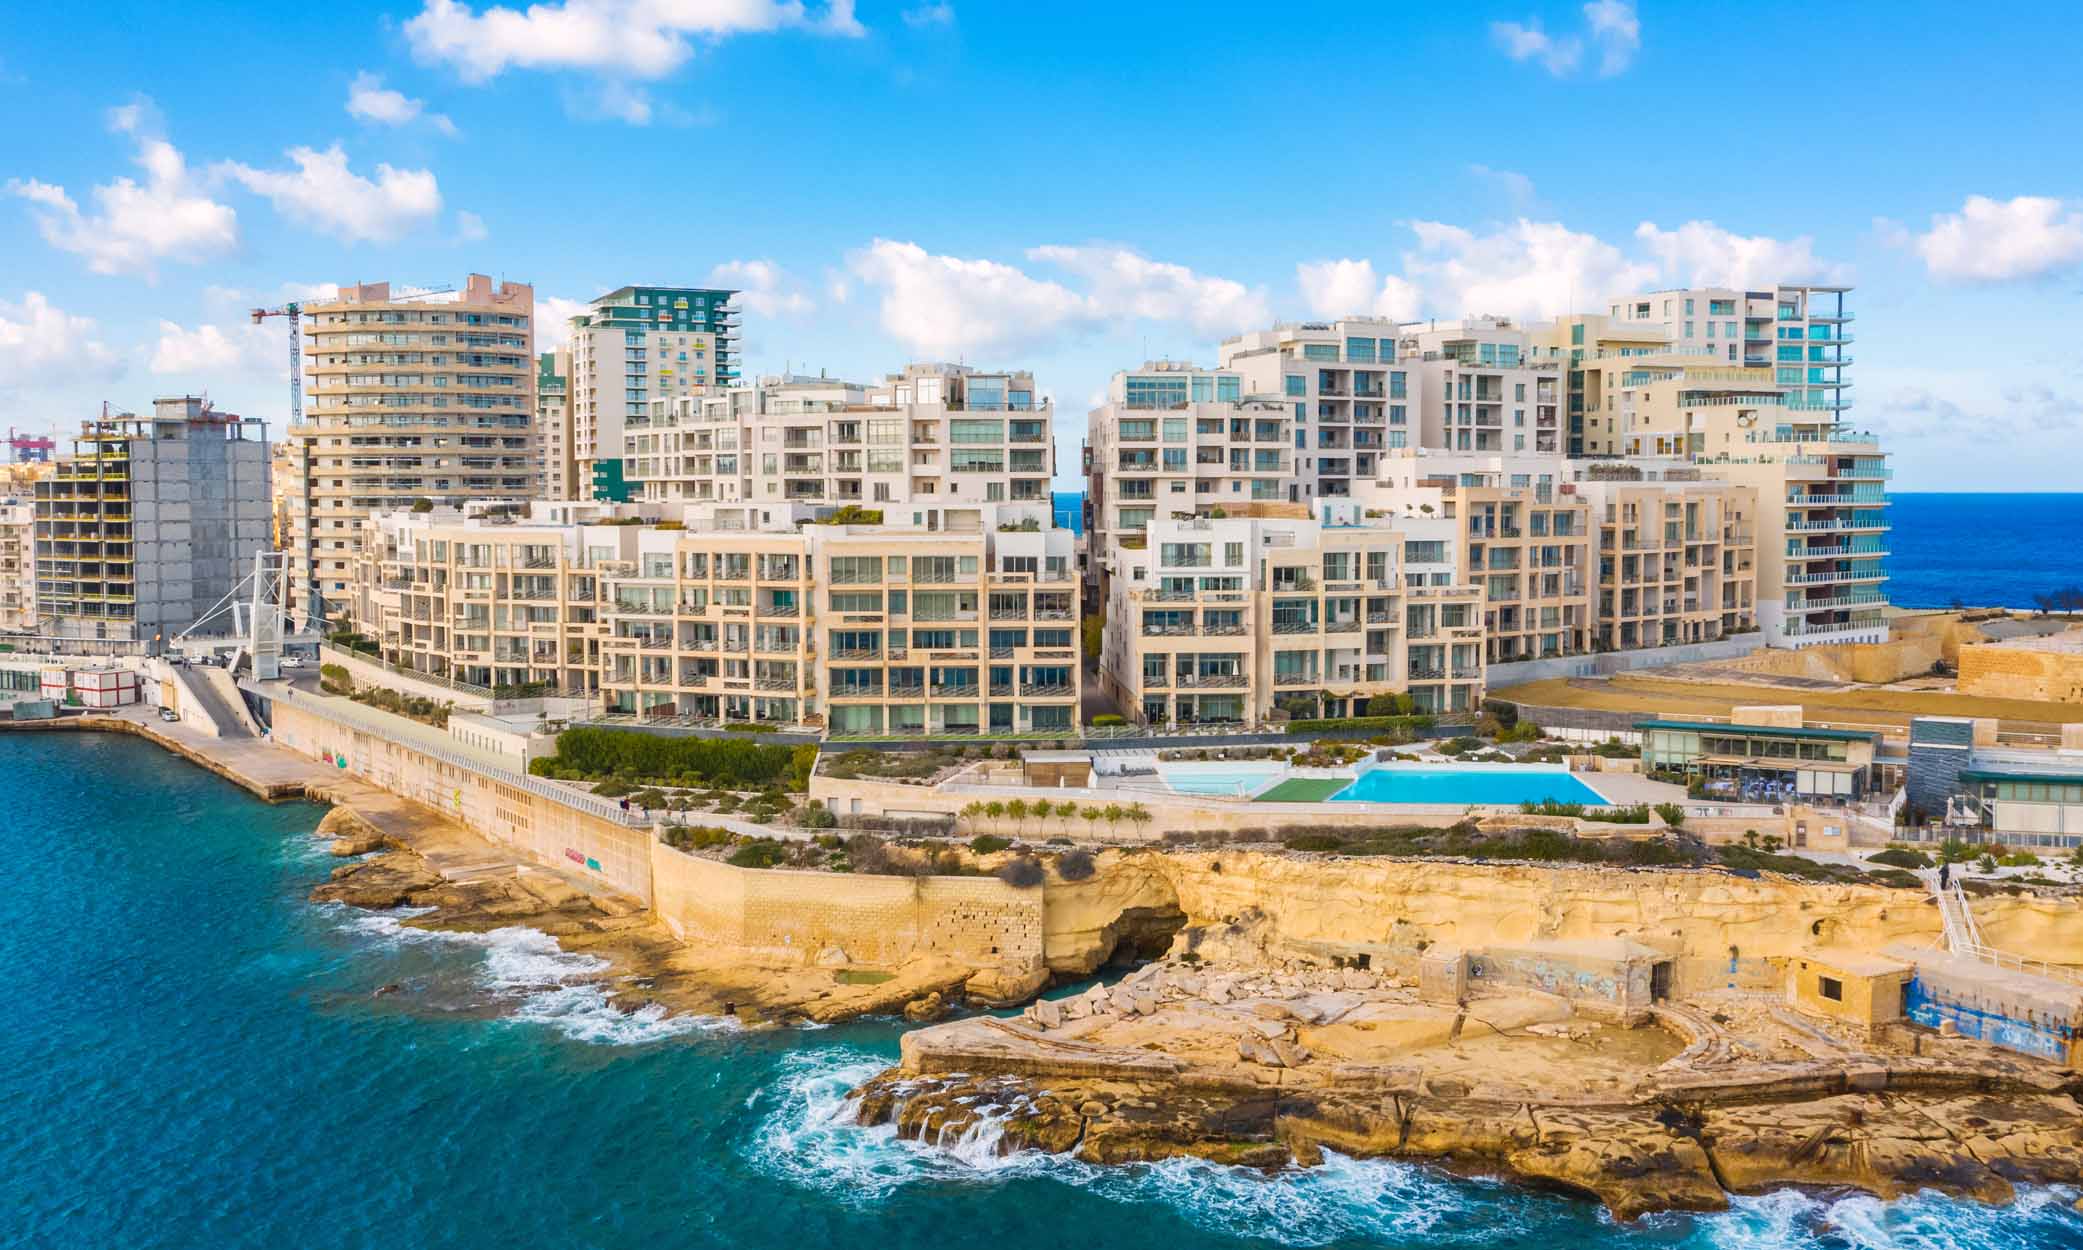 Maltese property can lead to citizenship or residency.